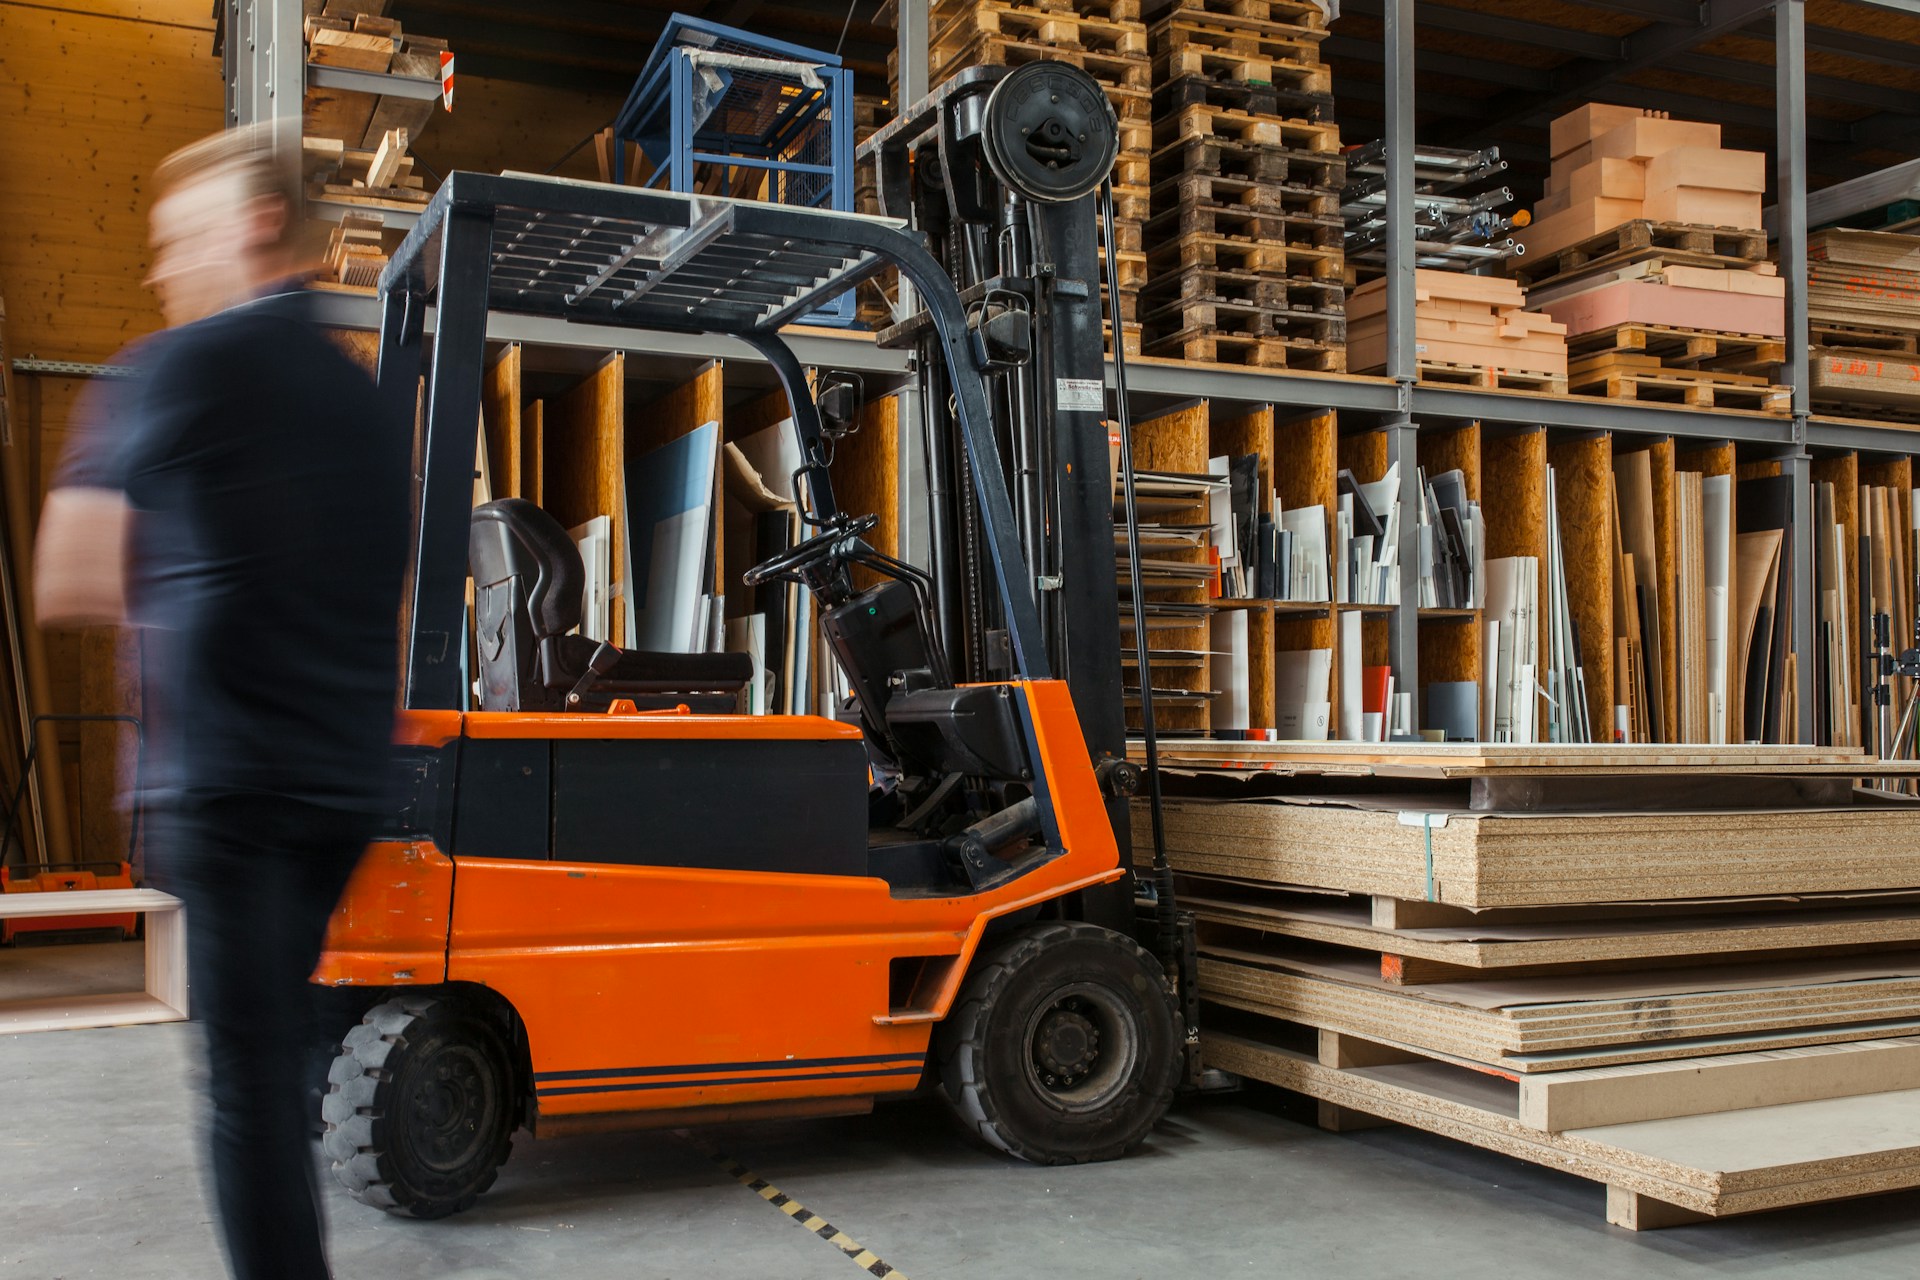 6 Things to Consider When Looking For Fork Truck Repair Services